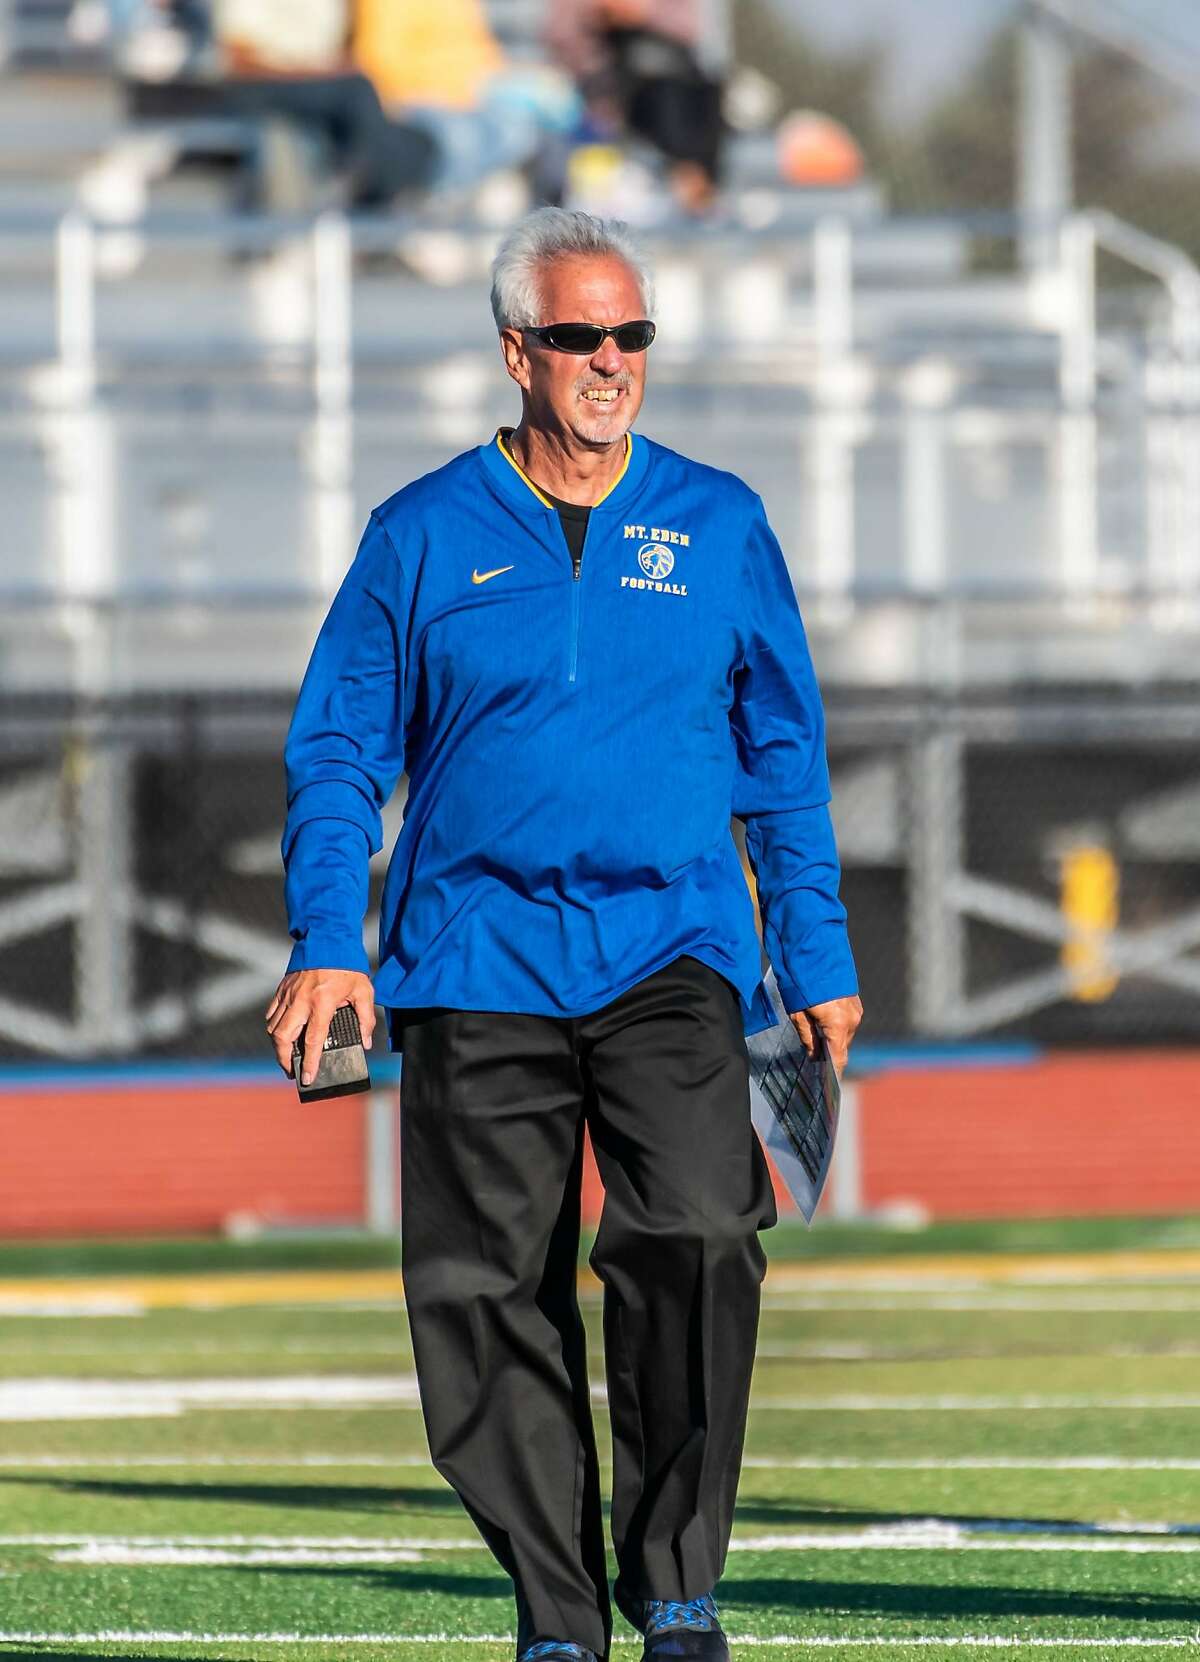 Mt. Eden-Hayward football coach Paul Perenon said of the revamped high school sports schedule the CIF released in July: “Frankly, those plans were written in pencil with a big fat giant eraser at the top.”